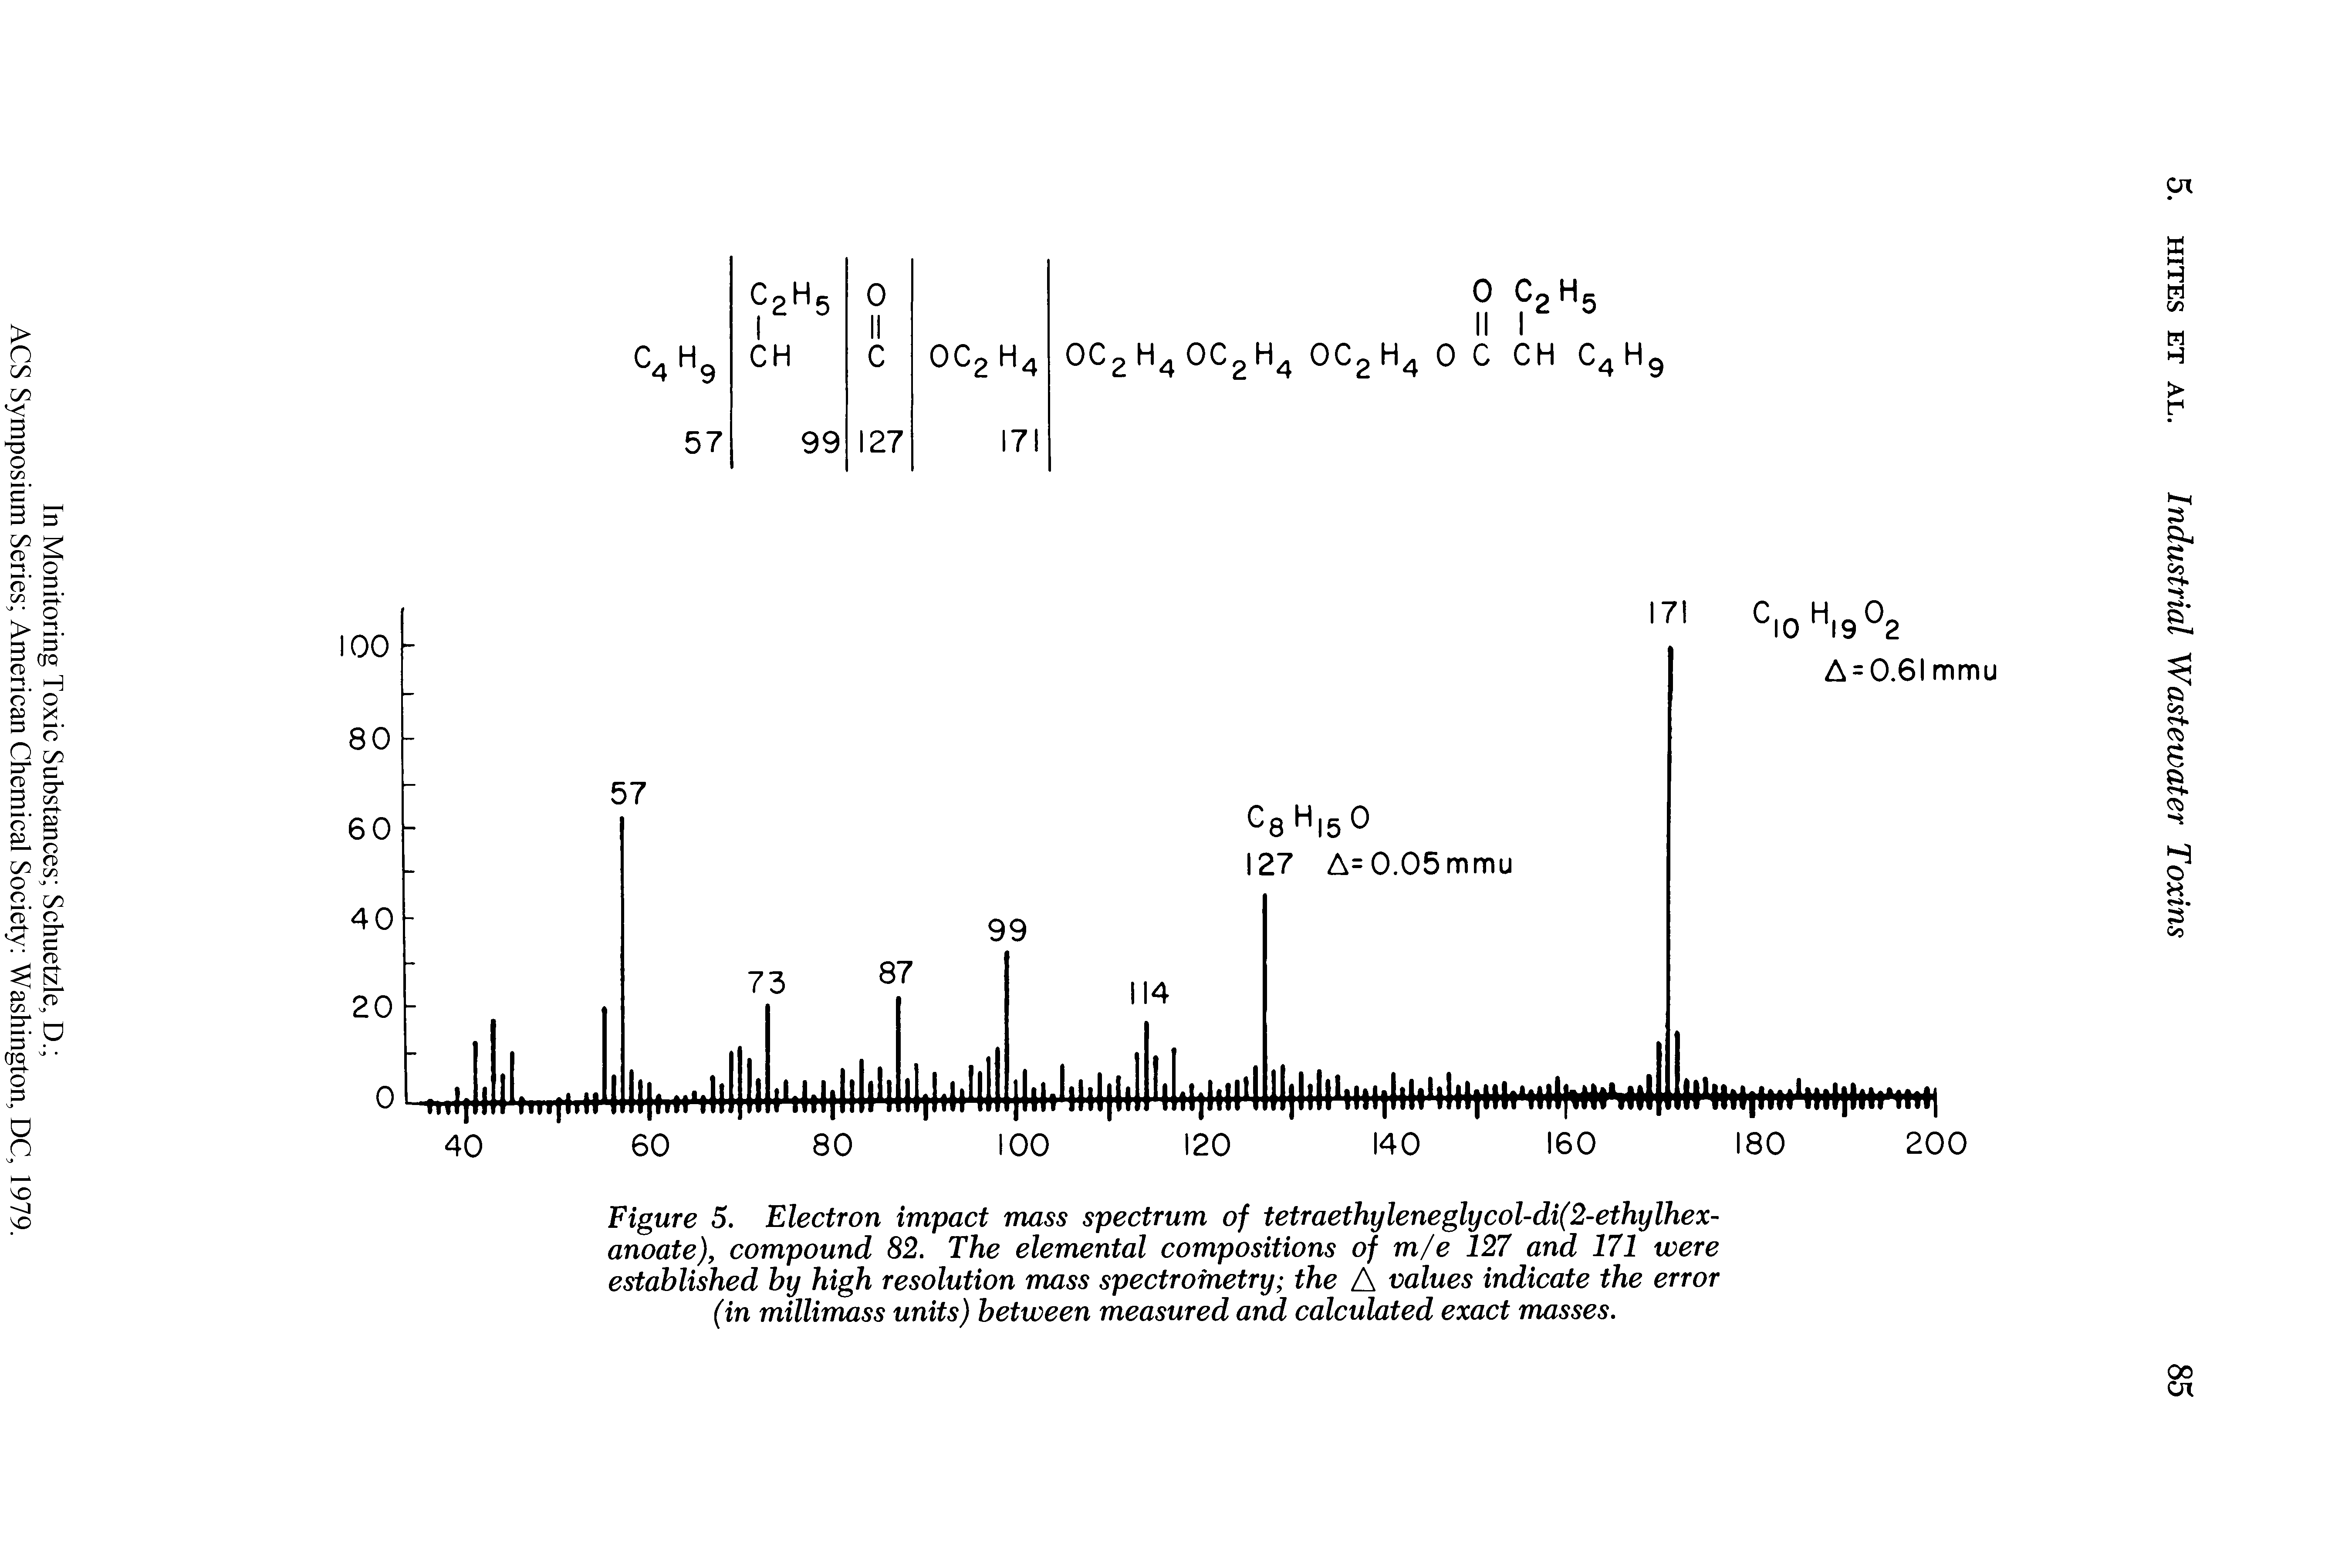 Figure 5. Electron impact mass spectrum of tetraethyleneglycol-di(2-ethylhex-anoate), compound 82. The elemental compositions of m/e 127 and 171 were established by high resolution mass spectrometry the A values indicate the error (in millimass units) between measured and calculated exact masses.